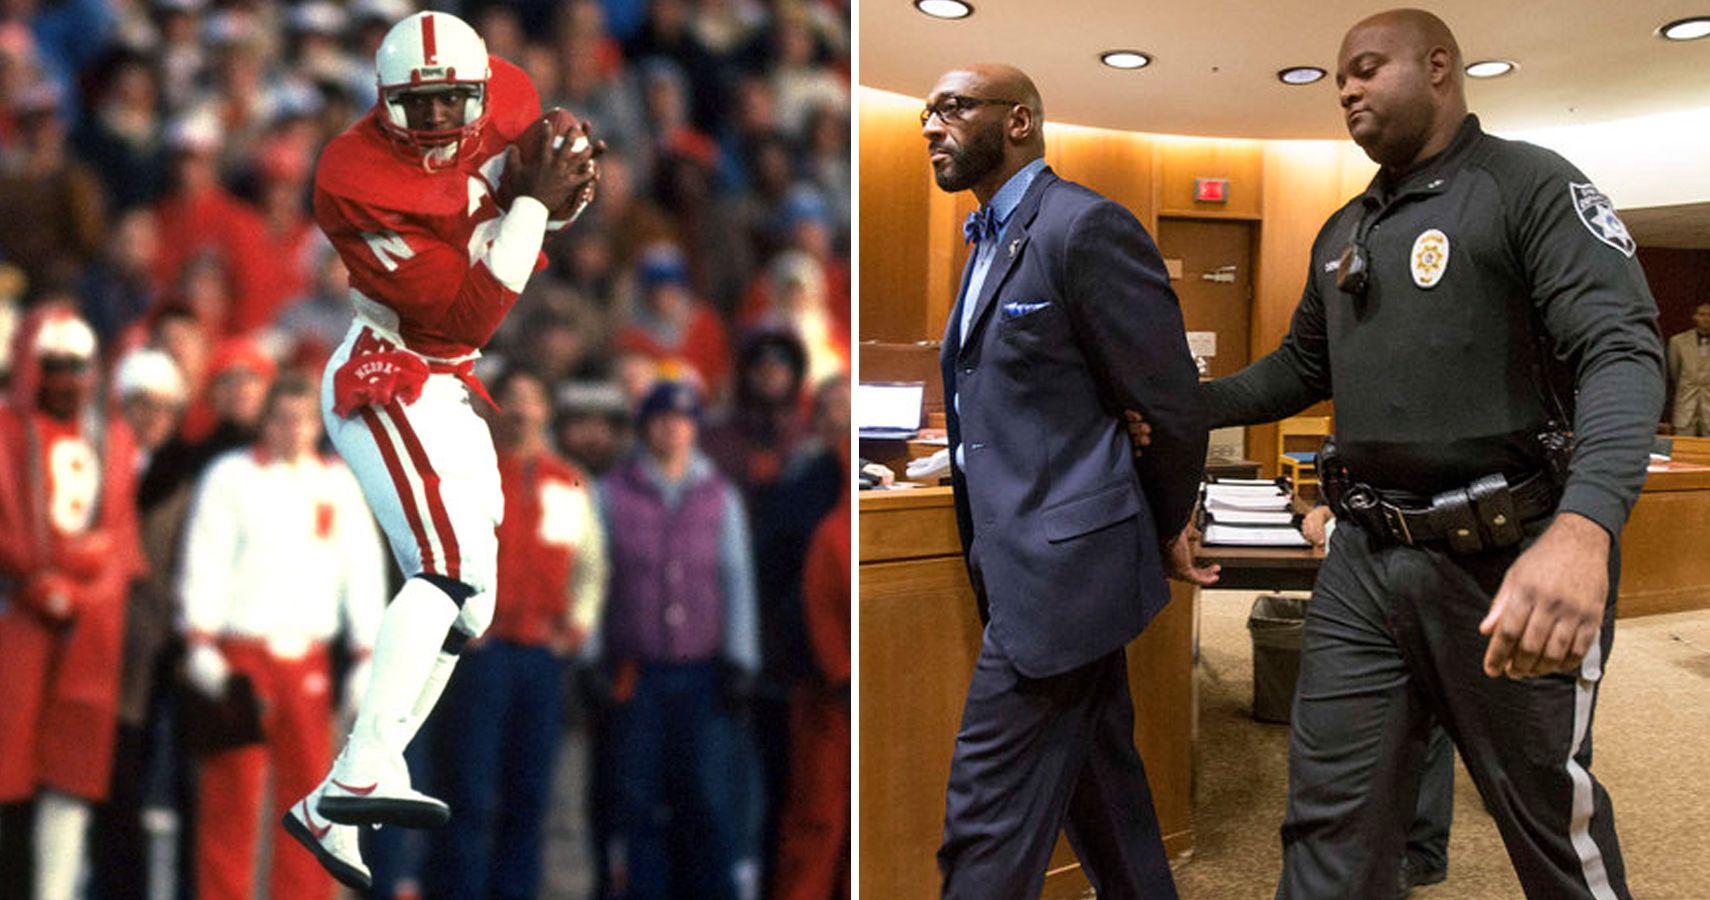 15 Ncaa Football Players You Didnt Know Had Criminal Records